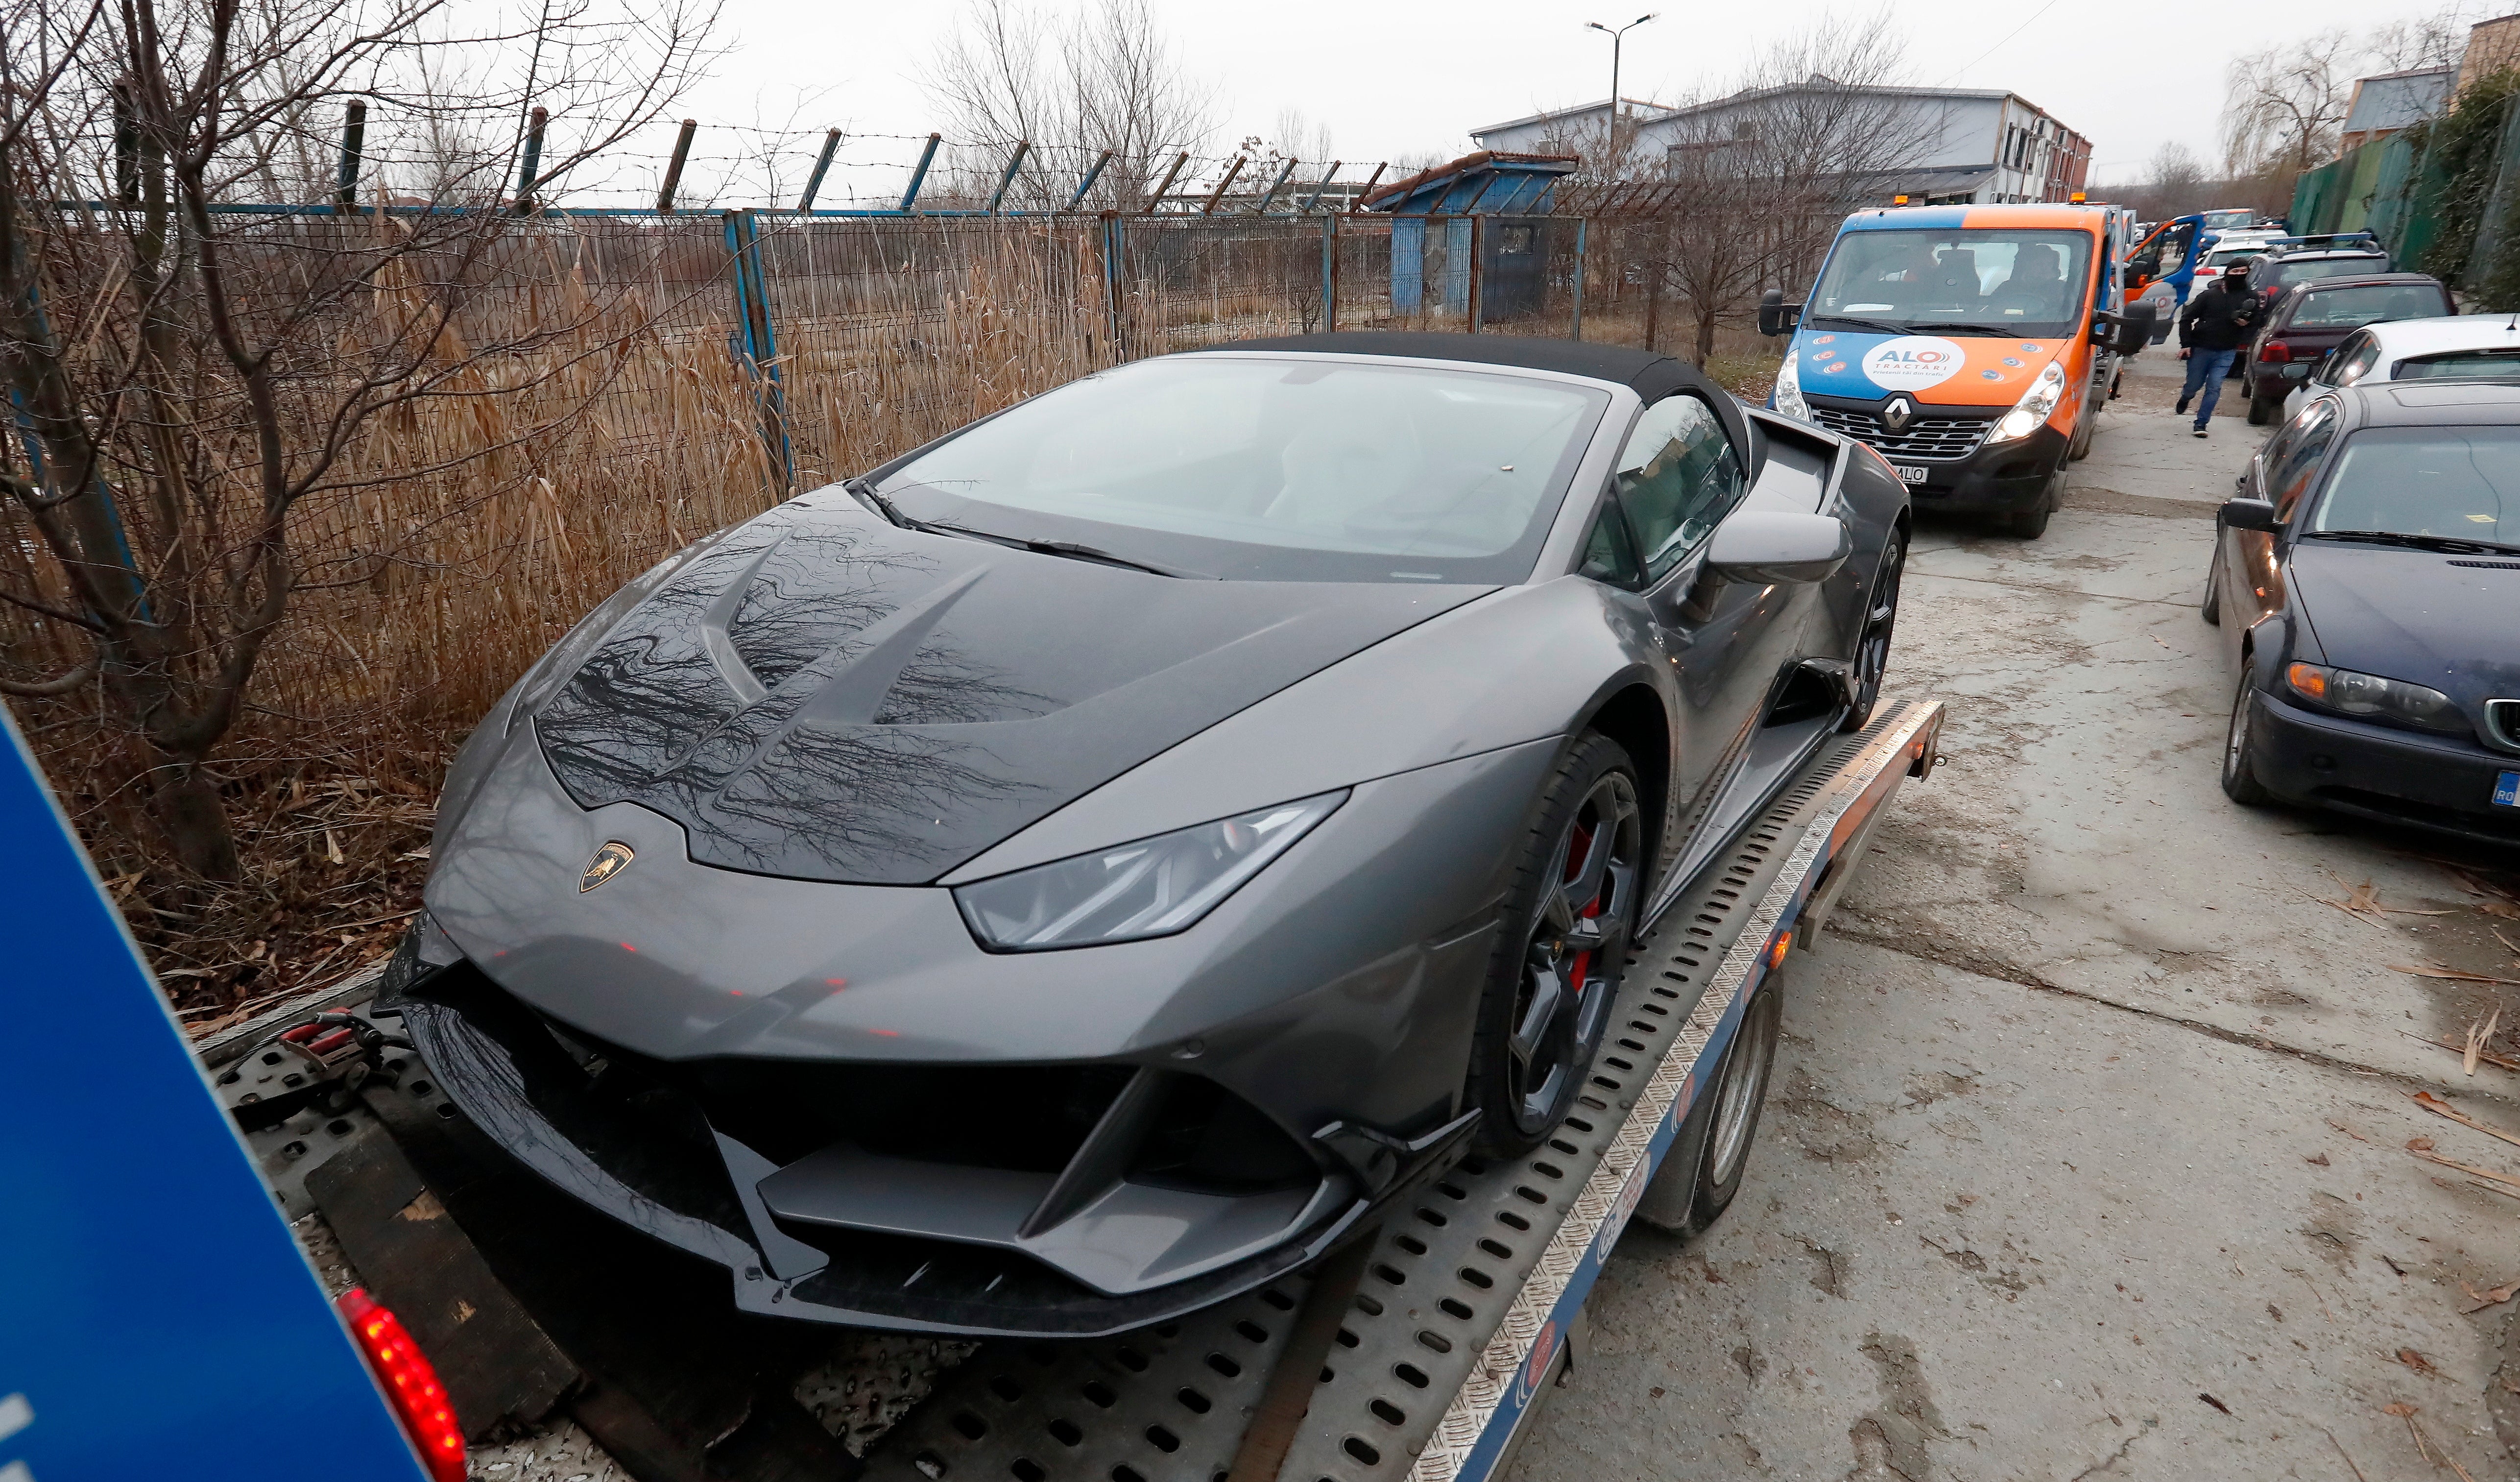 A Lamborghini belonging to Tate which has been seized